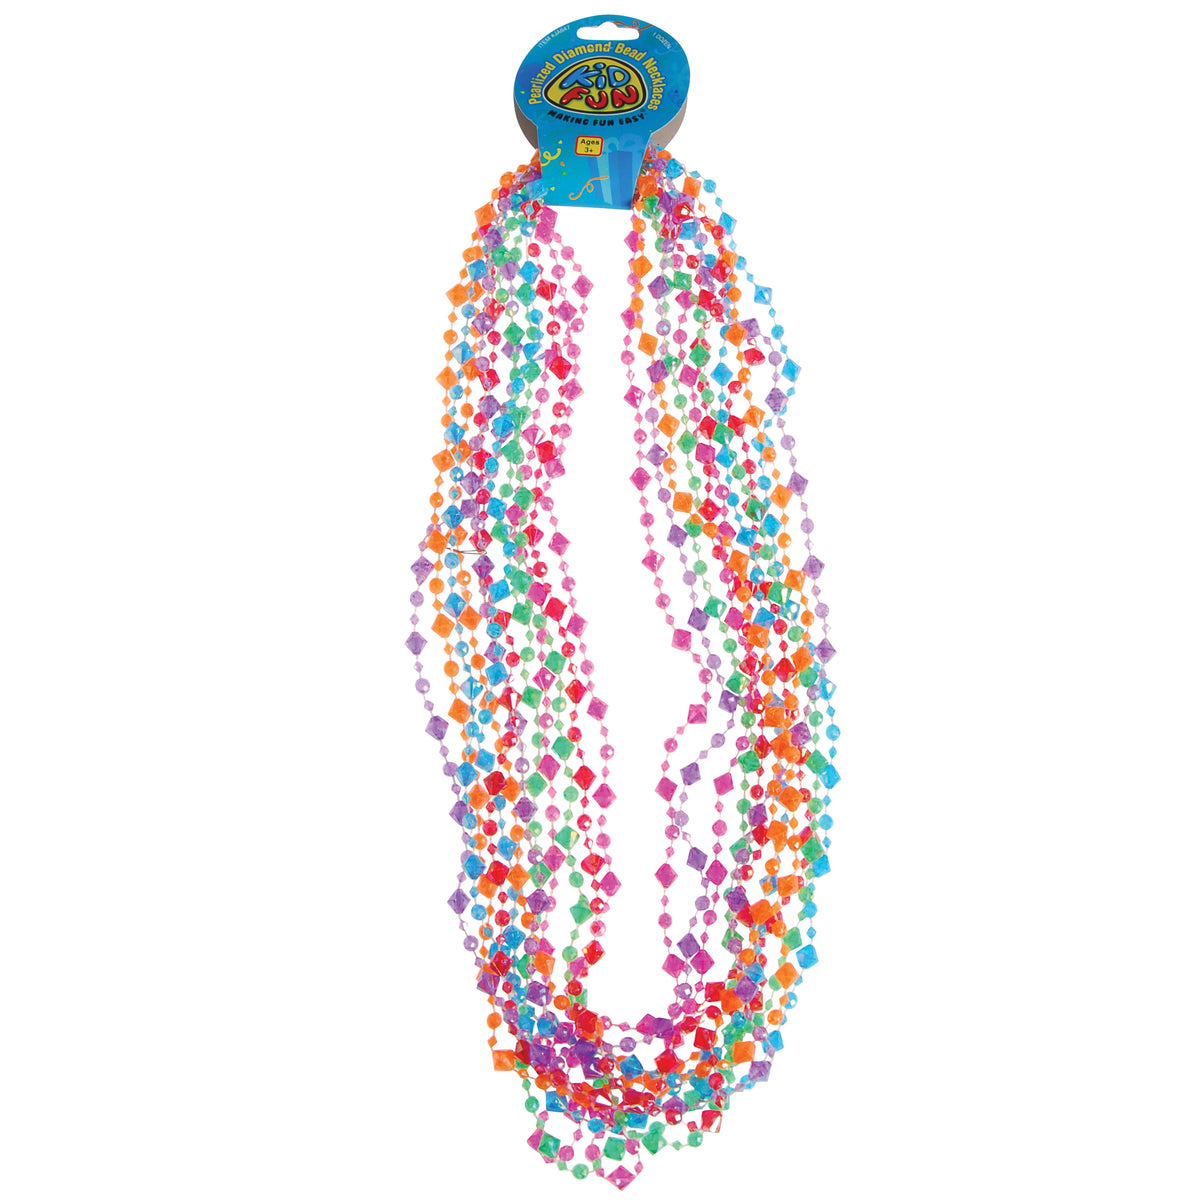 Mardi Gras Metallic Bead Necklaces Party Favor (144 pieces) - Duplicate -  Only $16.20 at Carnival Source